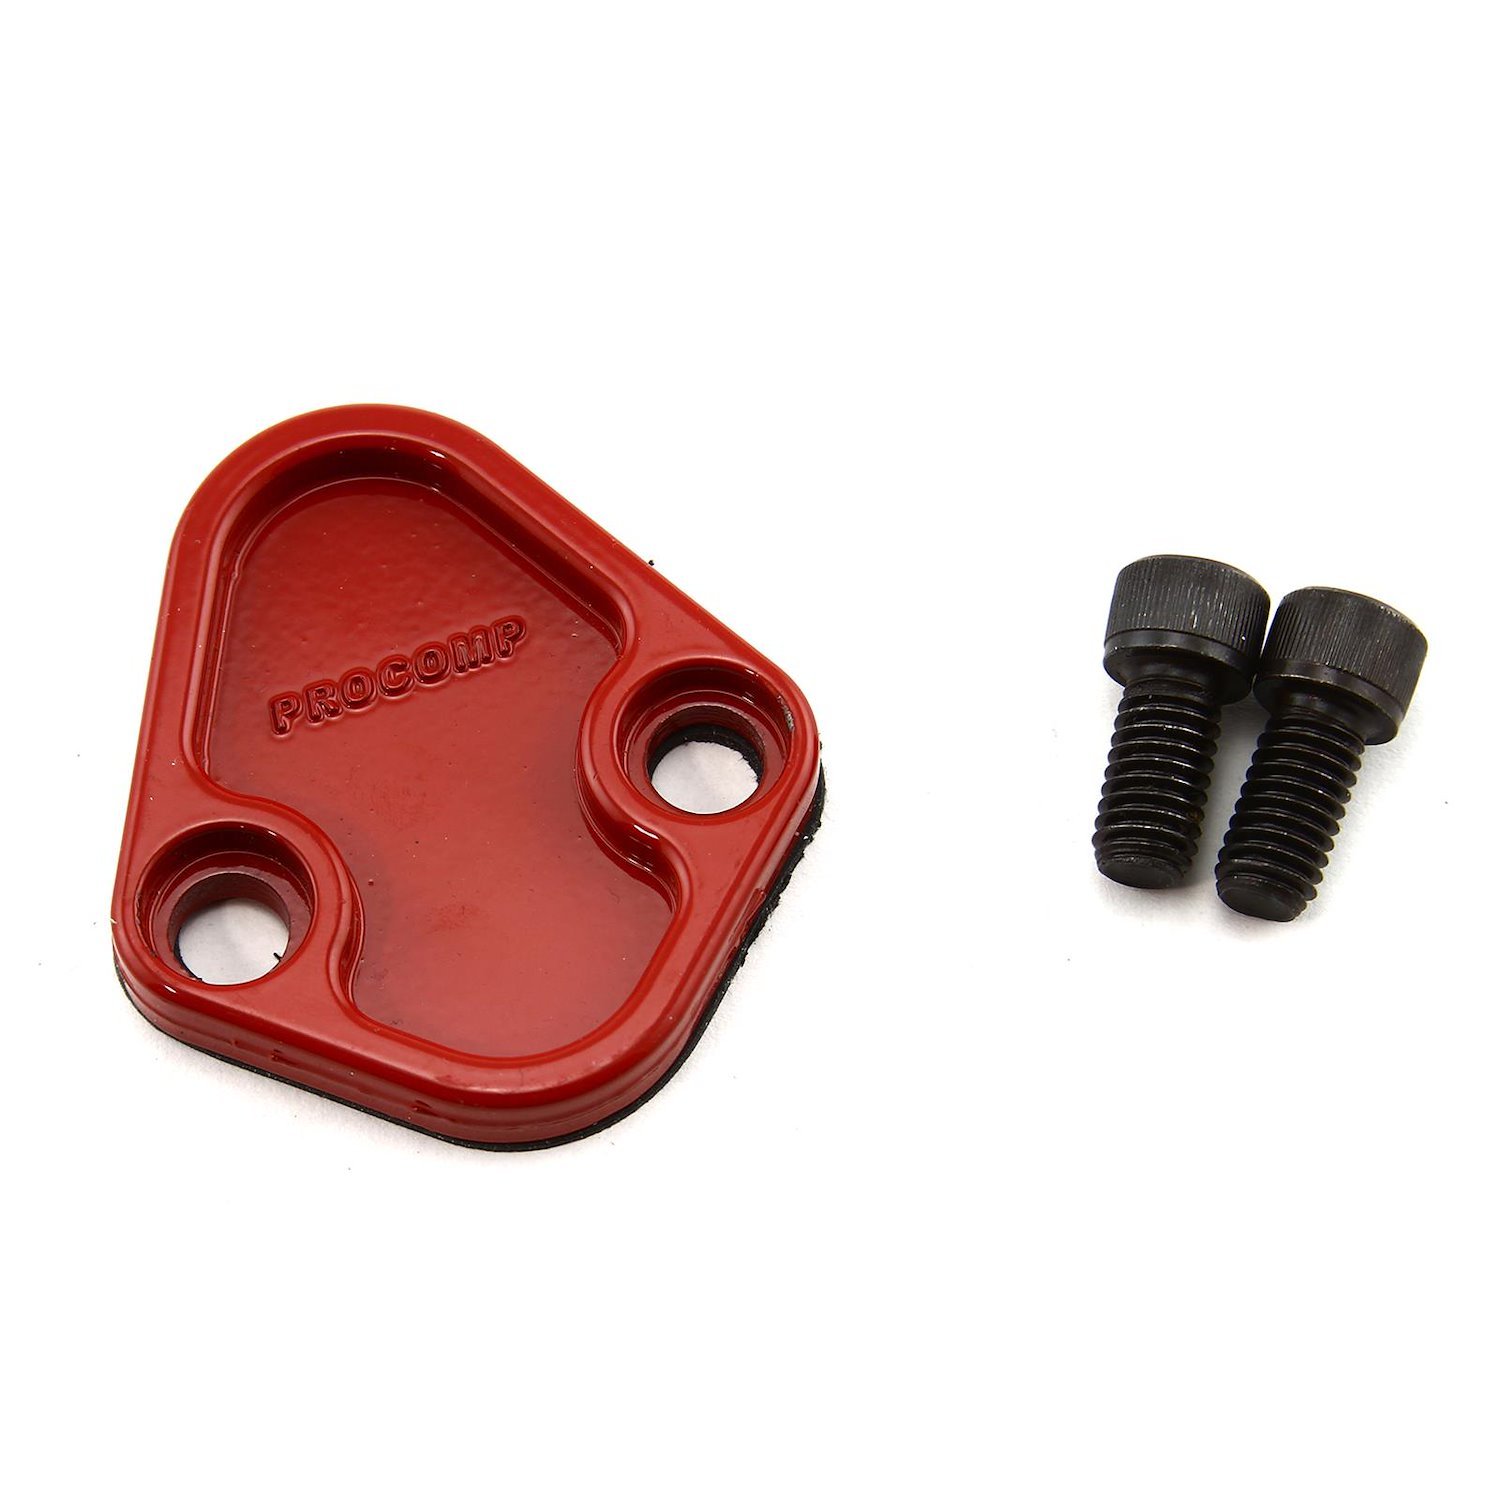 PCE140.1005 Universal Fuel Pump Block-Off Plate GM/Ford/Chrysler V8 [Red]